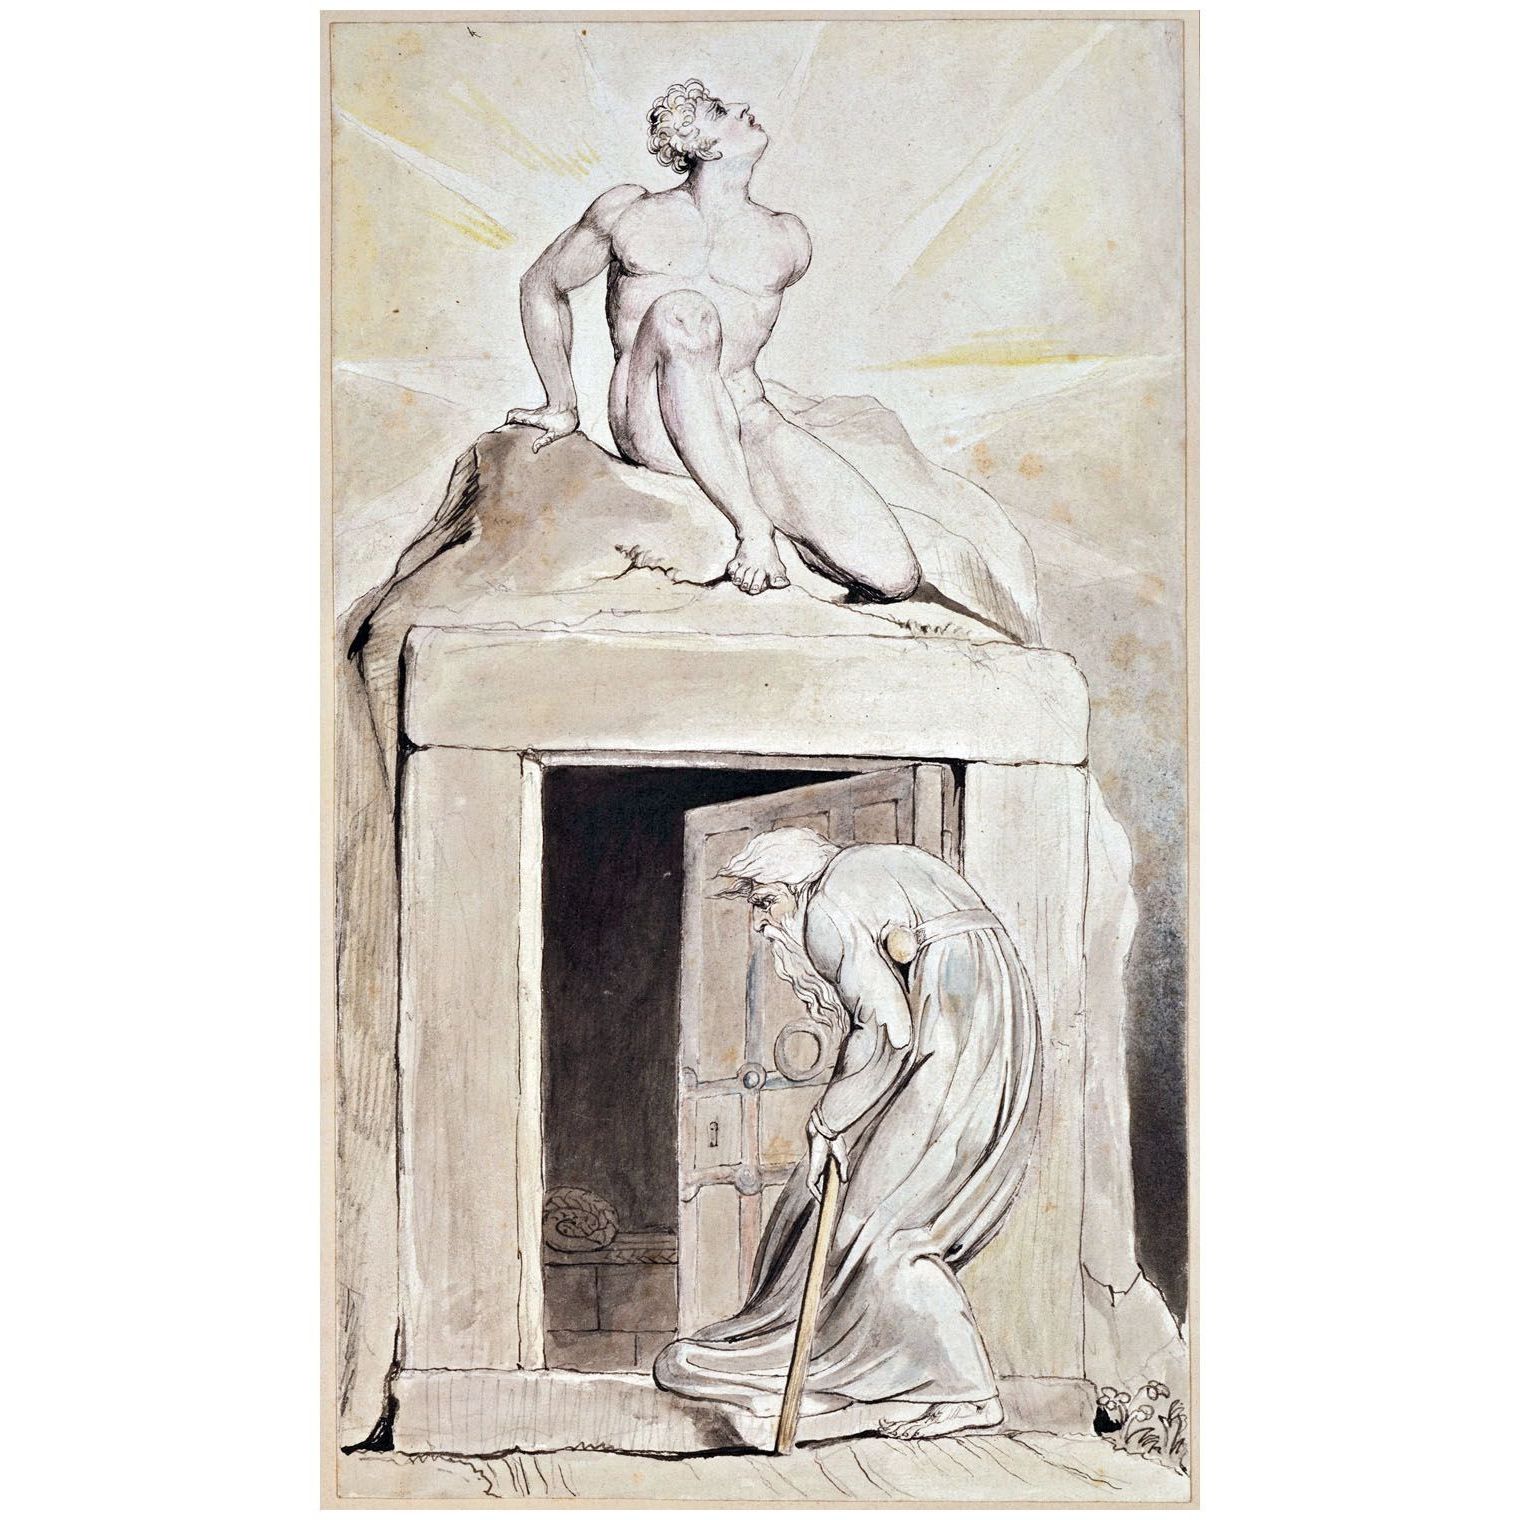 William Blake. Death's Door, Illustrations to Robert Blair's The Grave. 1805. NY Public Library